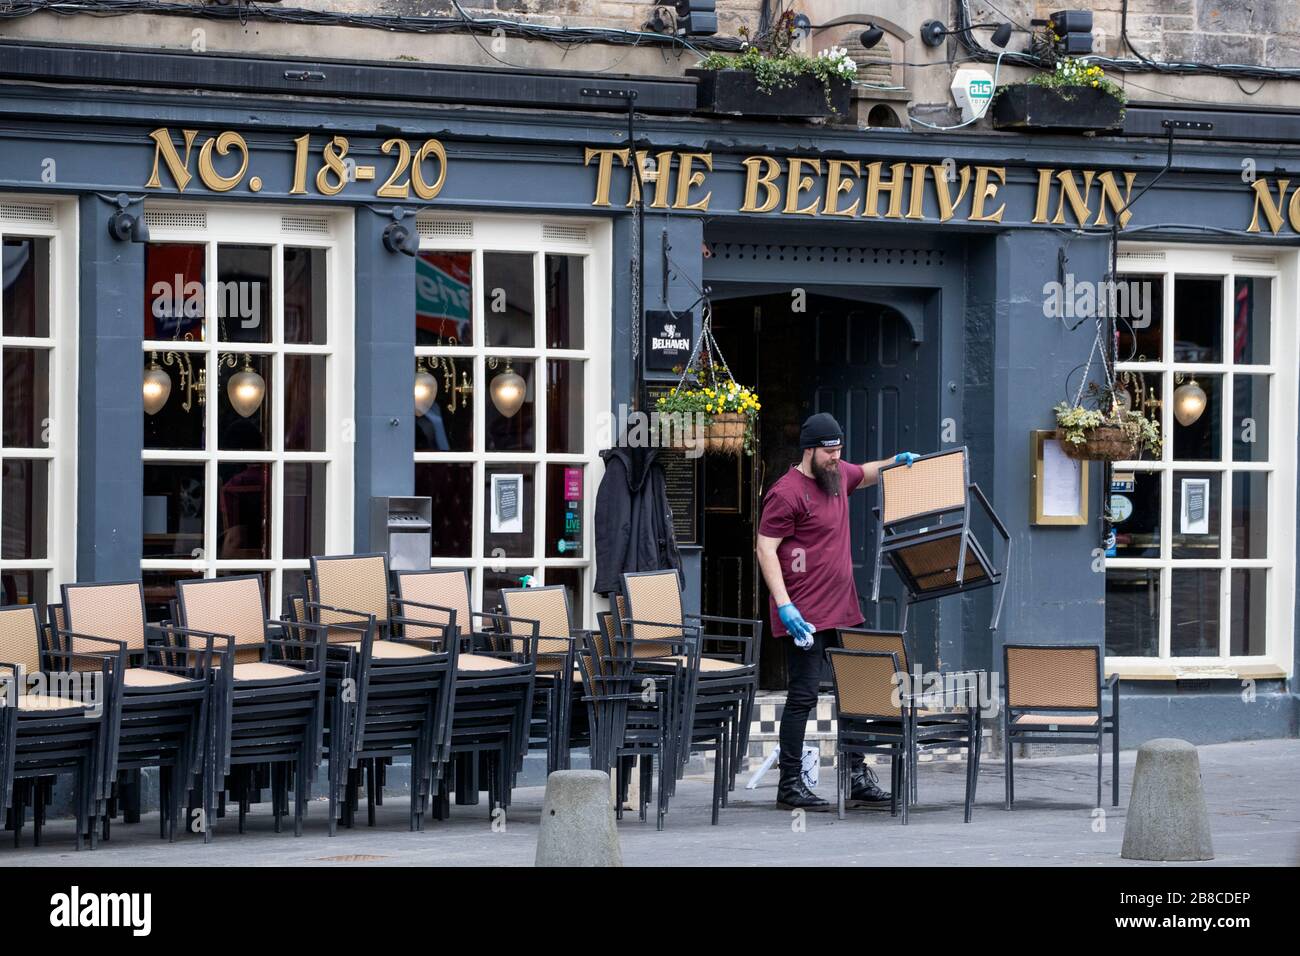 A member of staff at The Beehive Inn in the Grassmarket, Edinburgh, cleans and puts away the chairs following the pub's closure due to the coronavirus outbreak. Stock Photo